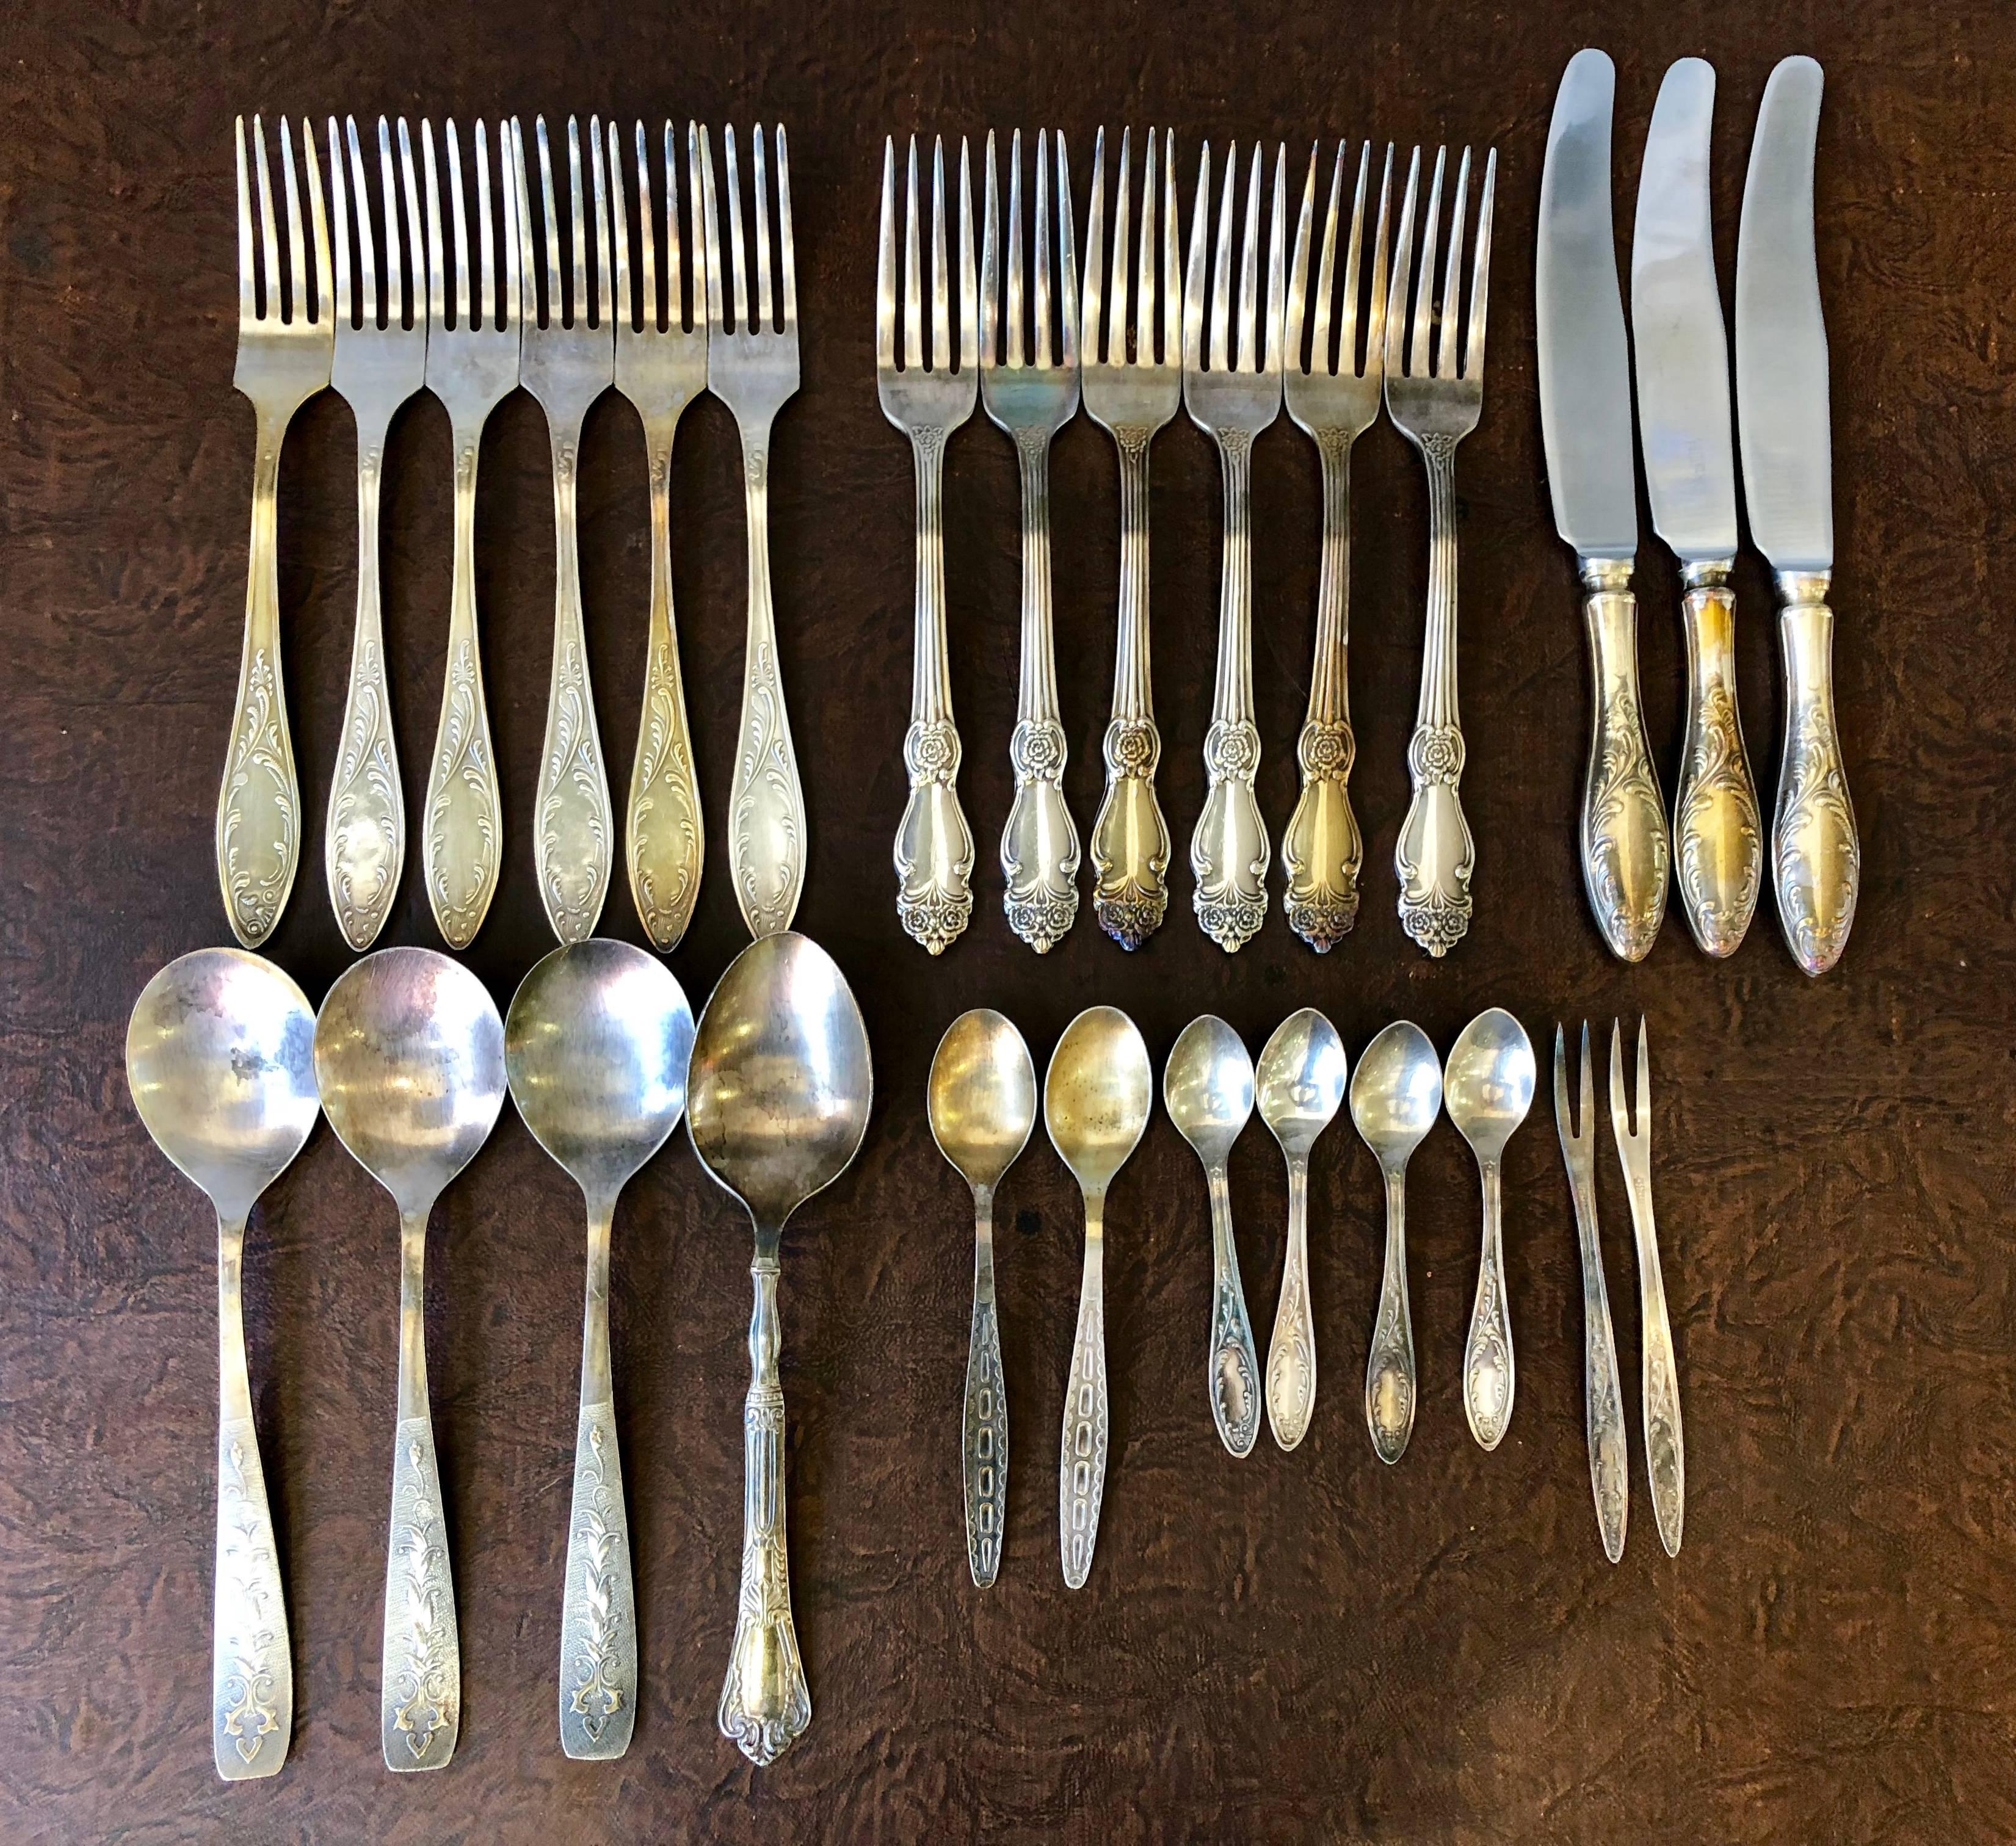 Vintage Russian German silver Melchior set of:
12 forks (six x two different ornaments)
Six (Two dessert or cake and four tea ) spoons
Three knives
Four soup spoons ( one is different style)
Two little forks.
Complimentary Shipping Worldwide !!!